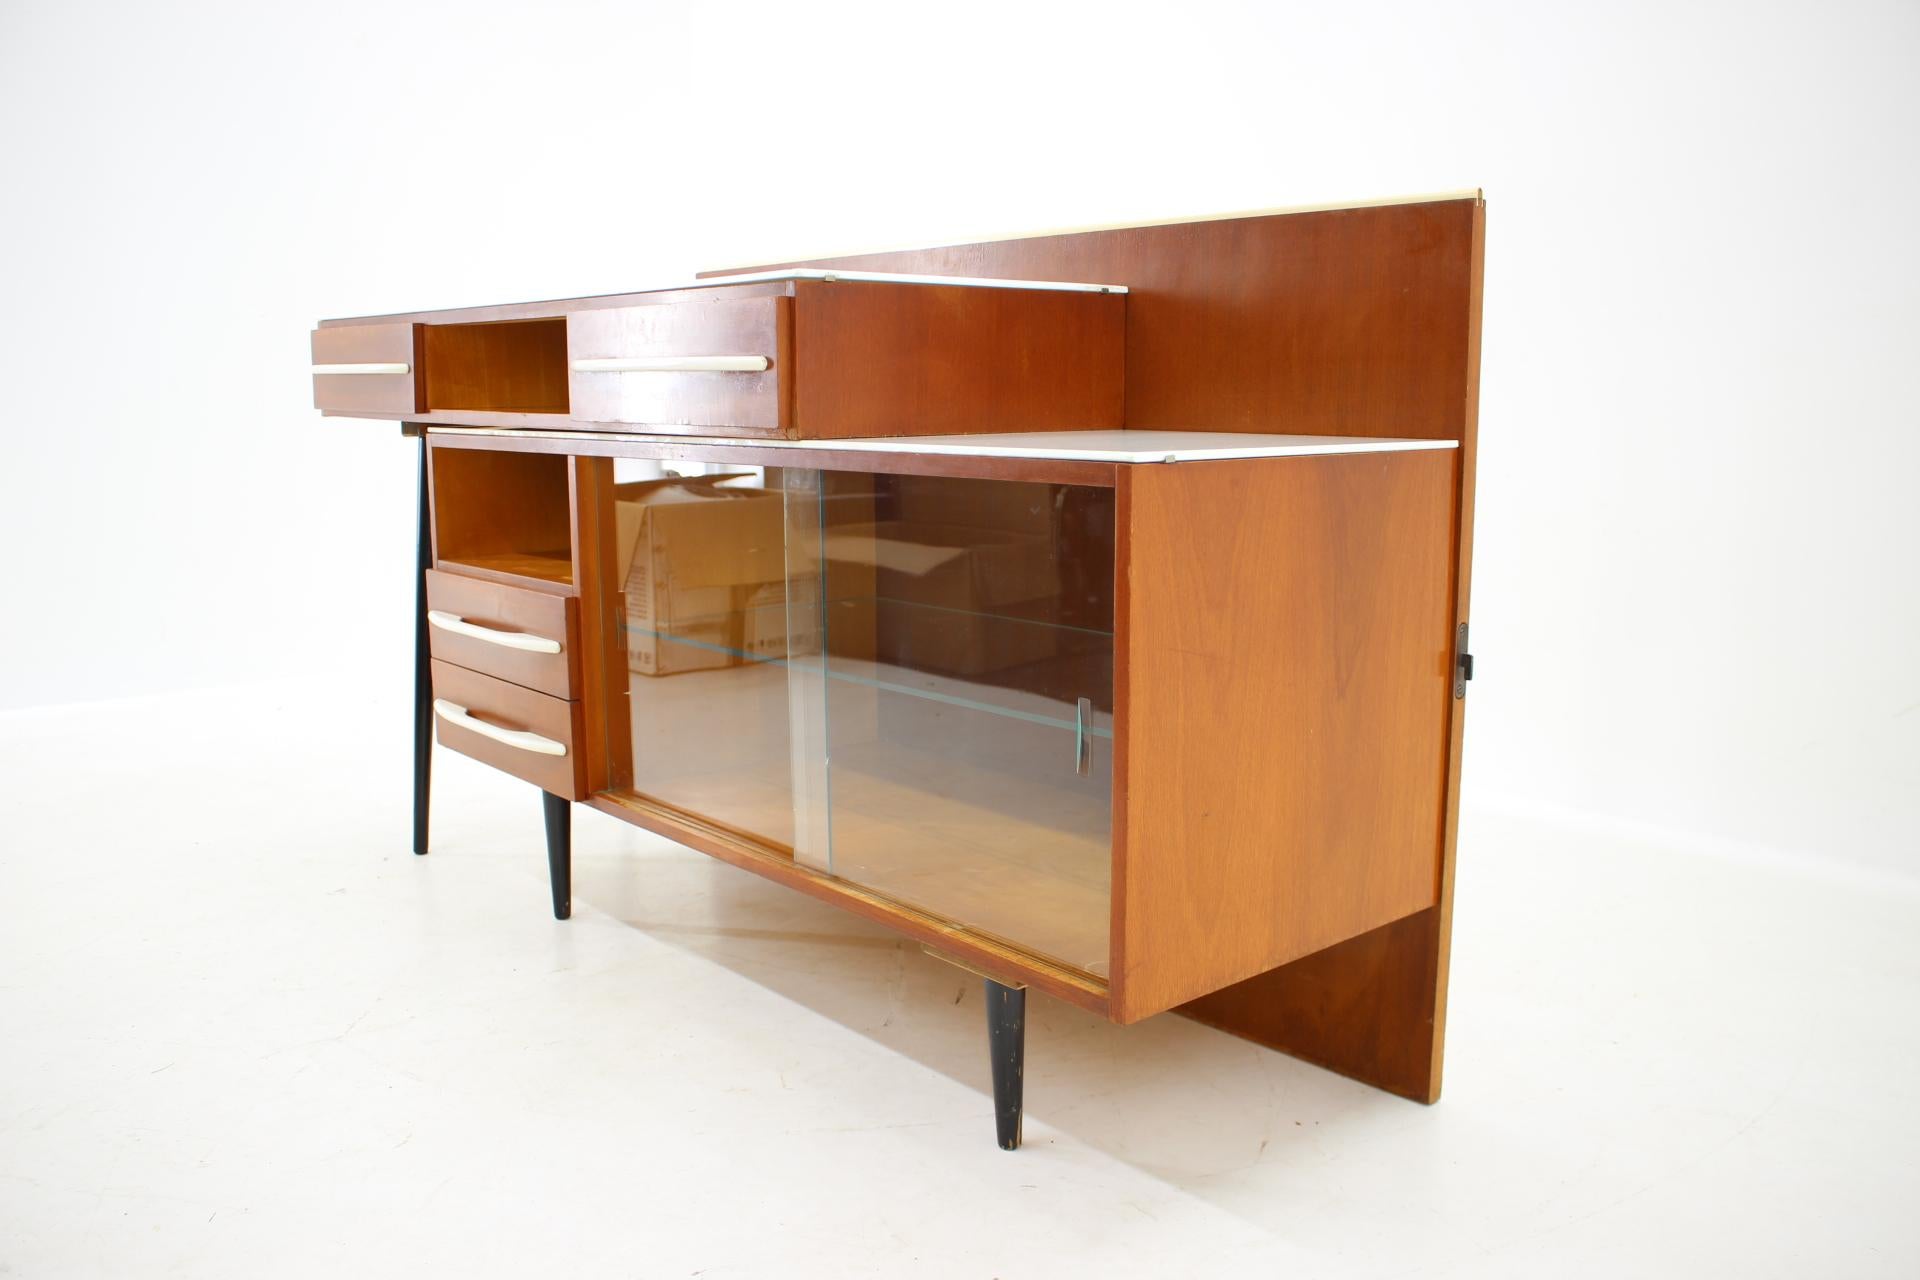 Wood 1960s M.Pozar Modular Set of Desk and Chest of Drawers, Czechoslovakia For Sale